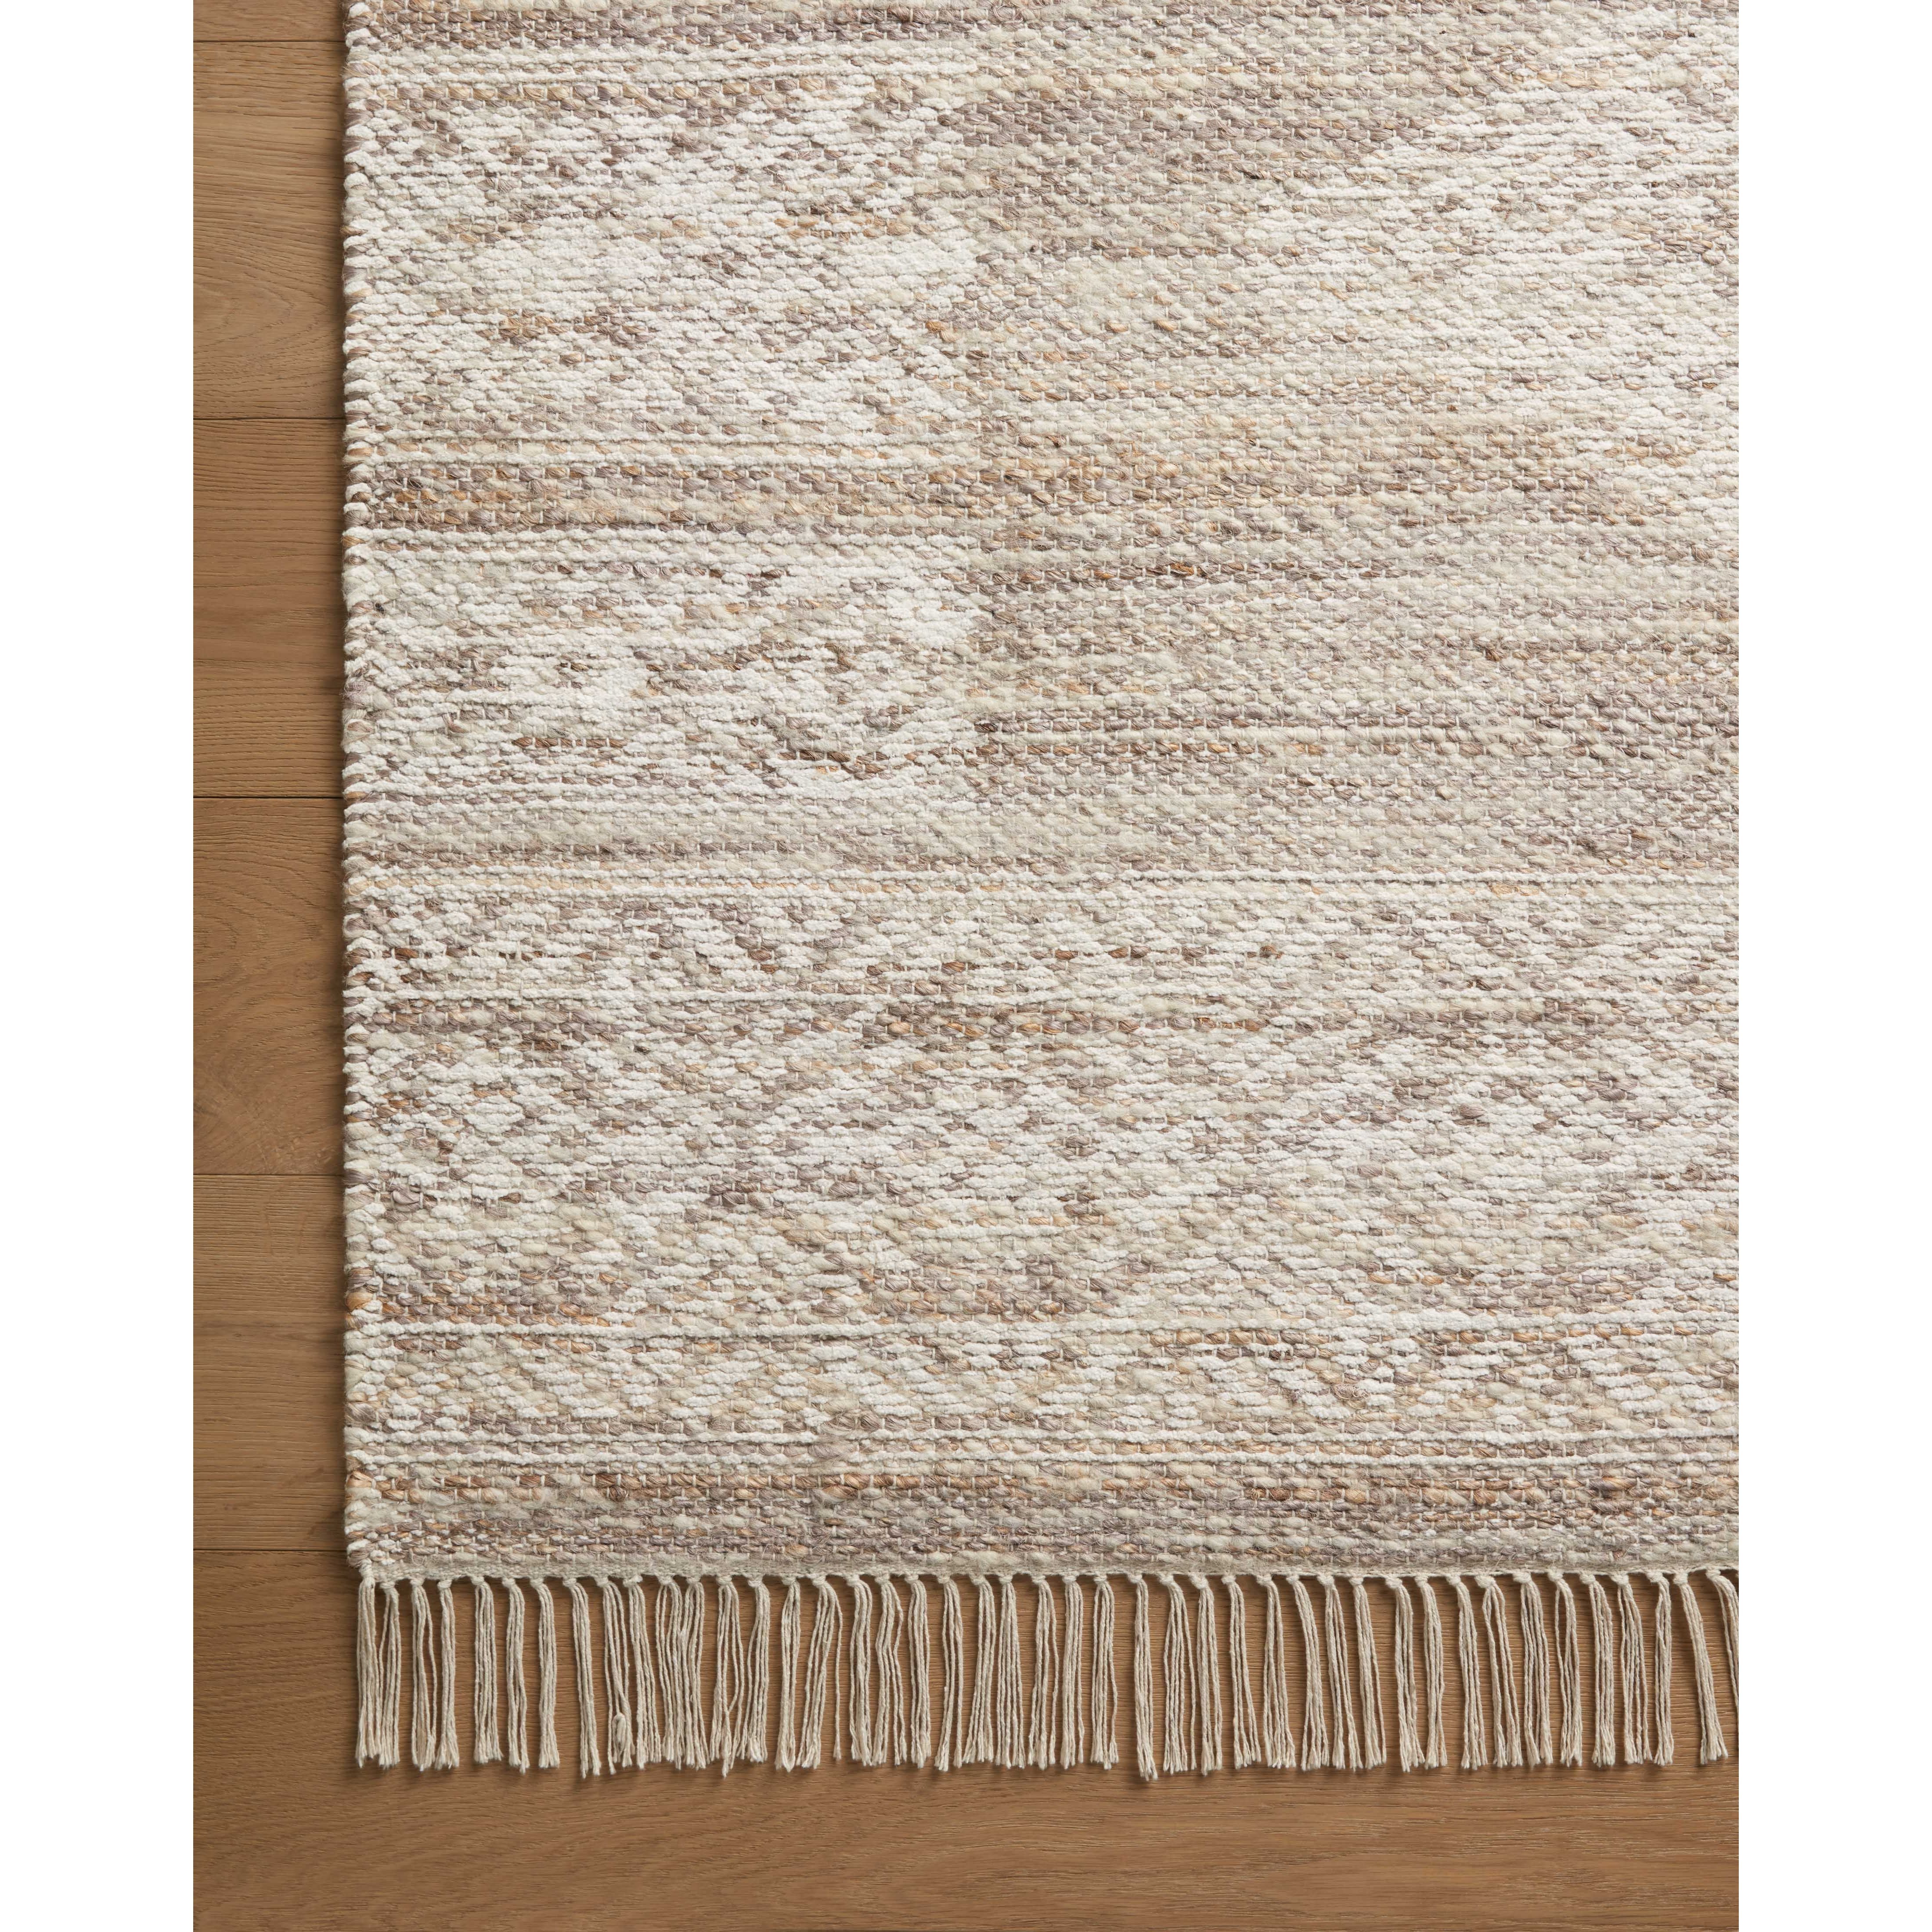 The Rivers Collection by Angela Rose x Loloi is a modern flatweave area rug with a reversible design featuring symmetrical motifs. Woven of wool, cotton, and jute, Rivers combines natural materials with an airy, natural aesthetic. The soft colors of the rug create a watercolor effect that adds artful depth to the neutral palette. Amethyst Home provides interior design, new home construction design consulting, vintage area rugs, and lighting in the Seattle metro area.